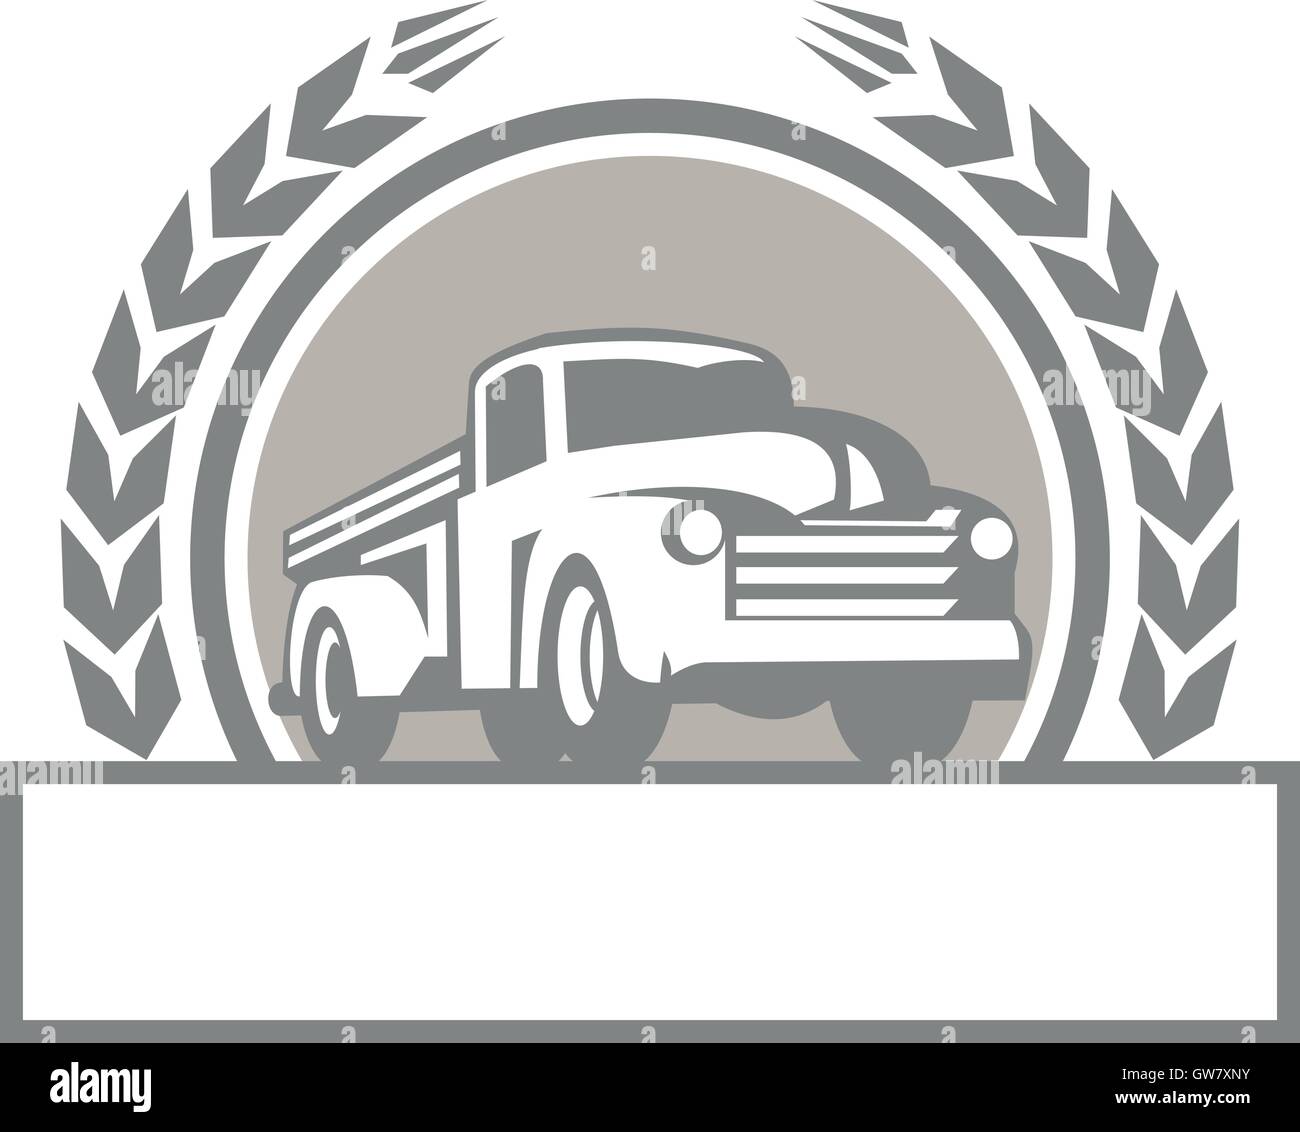 Illustration of a vintage pick up truck set inside circle with stylized wheat wreath done in retro style. Stock Vector